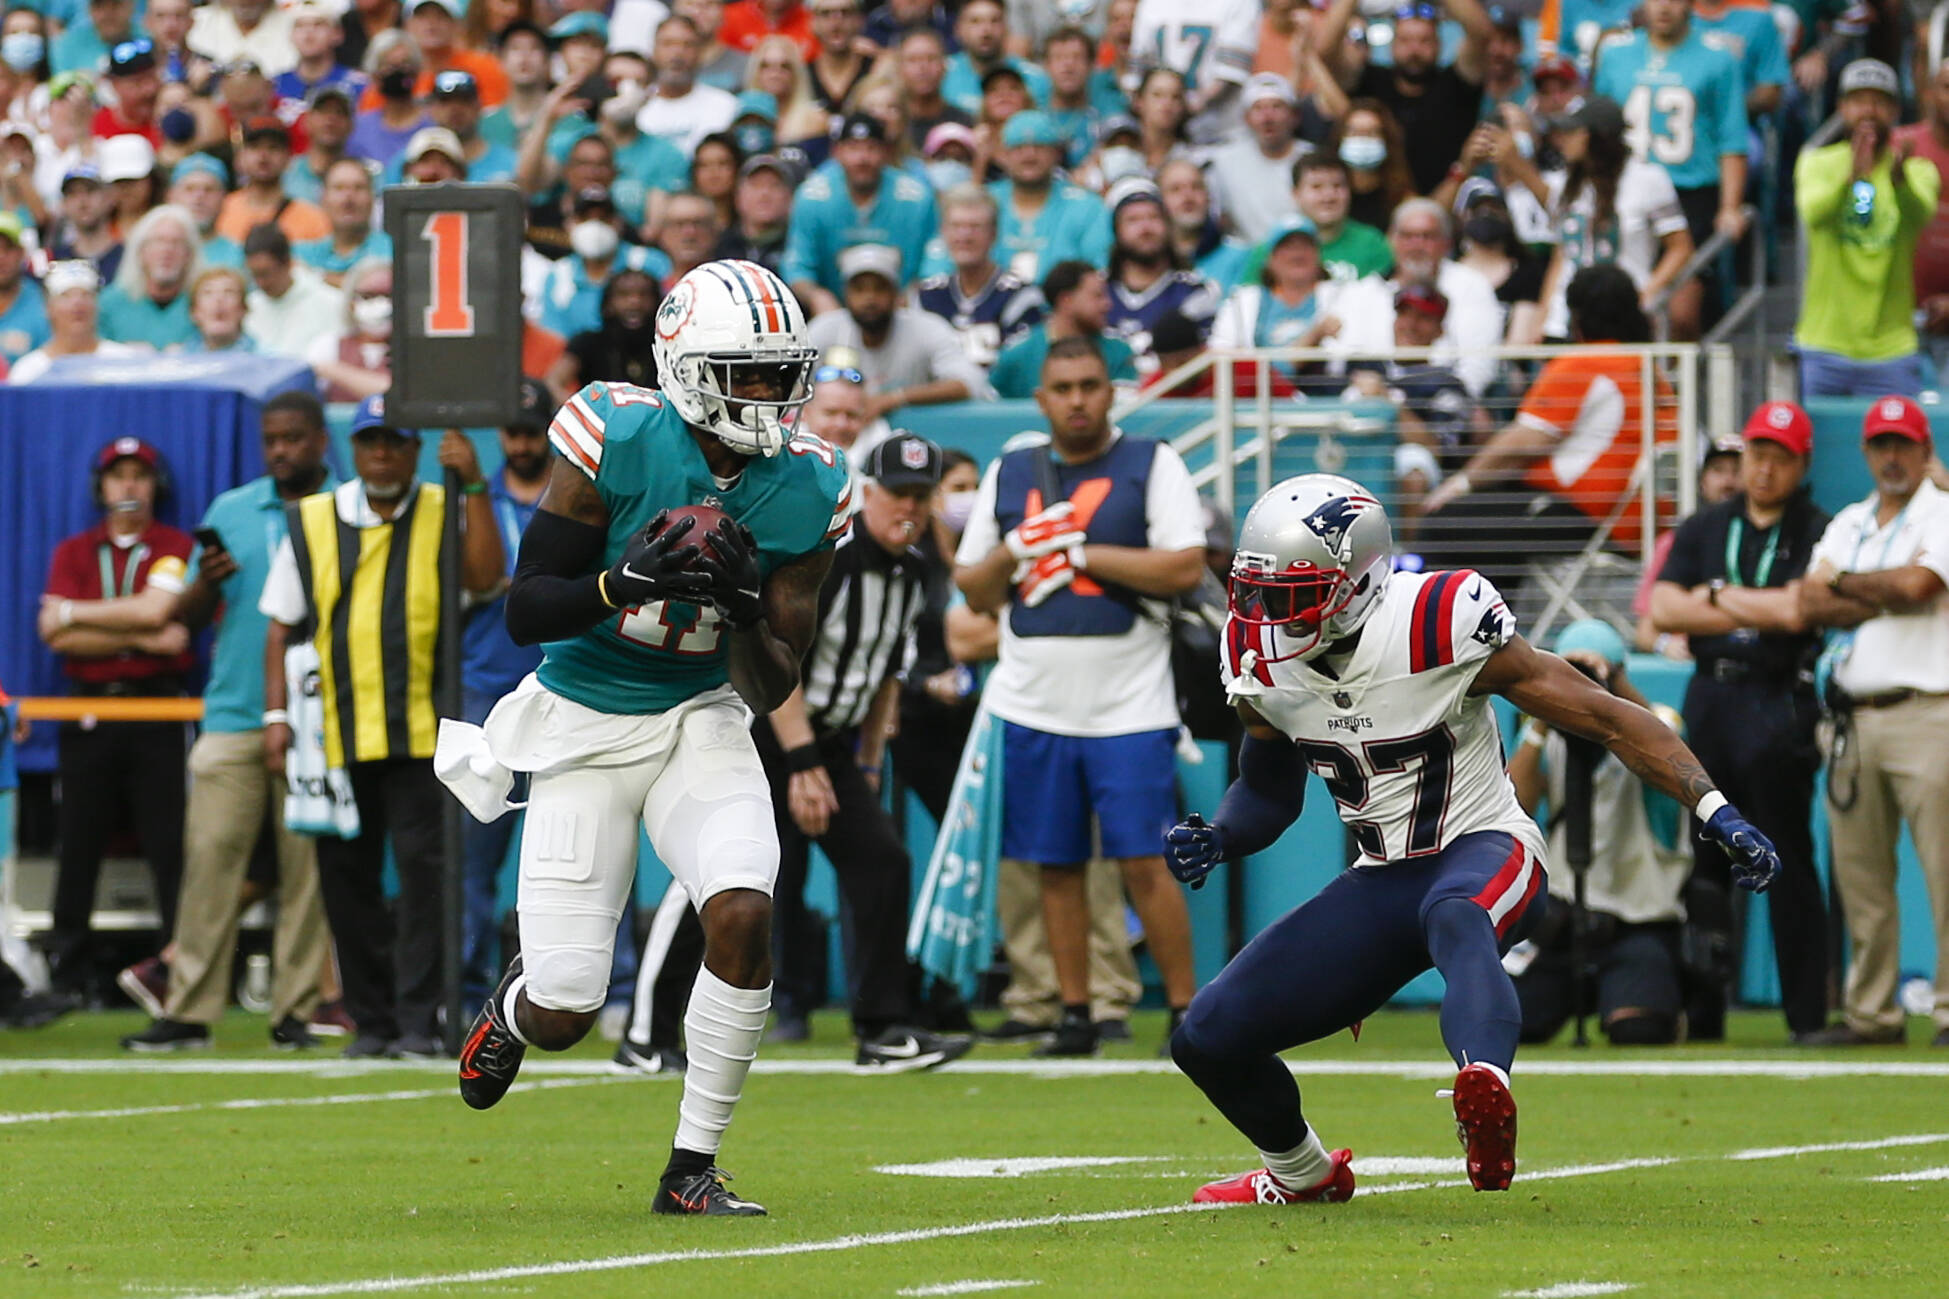 MIAMI GARDENS, FL - JANUARY 09: Miami Dolphins wide receiver DeVante Parker 11 runs with the ball after a catch during the game between the New England Patriots and the Miami Dolphins on January 9, 2022 at Hard Rock Stadium in Miami Gardens, Fl. Photo by David Rosenblum/Icon Sportswire NFL, American Football Herren, USA JAN 09 Patriots at Dolphins Icon22010982039